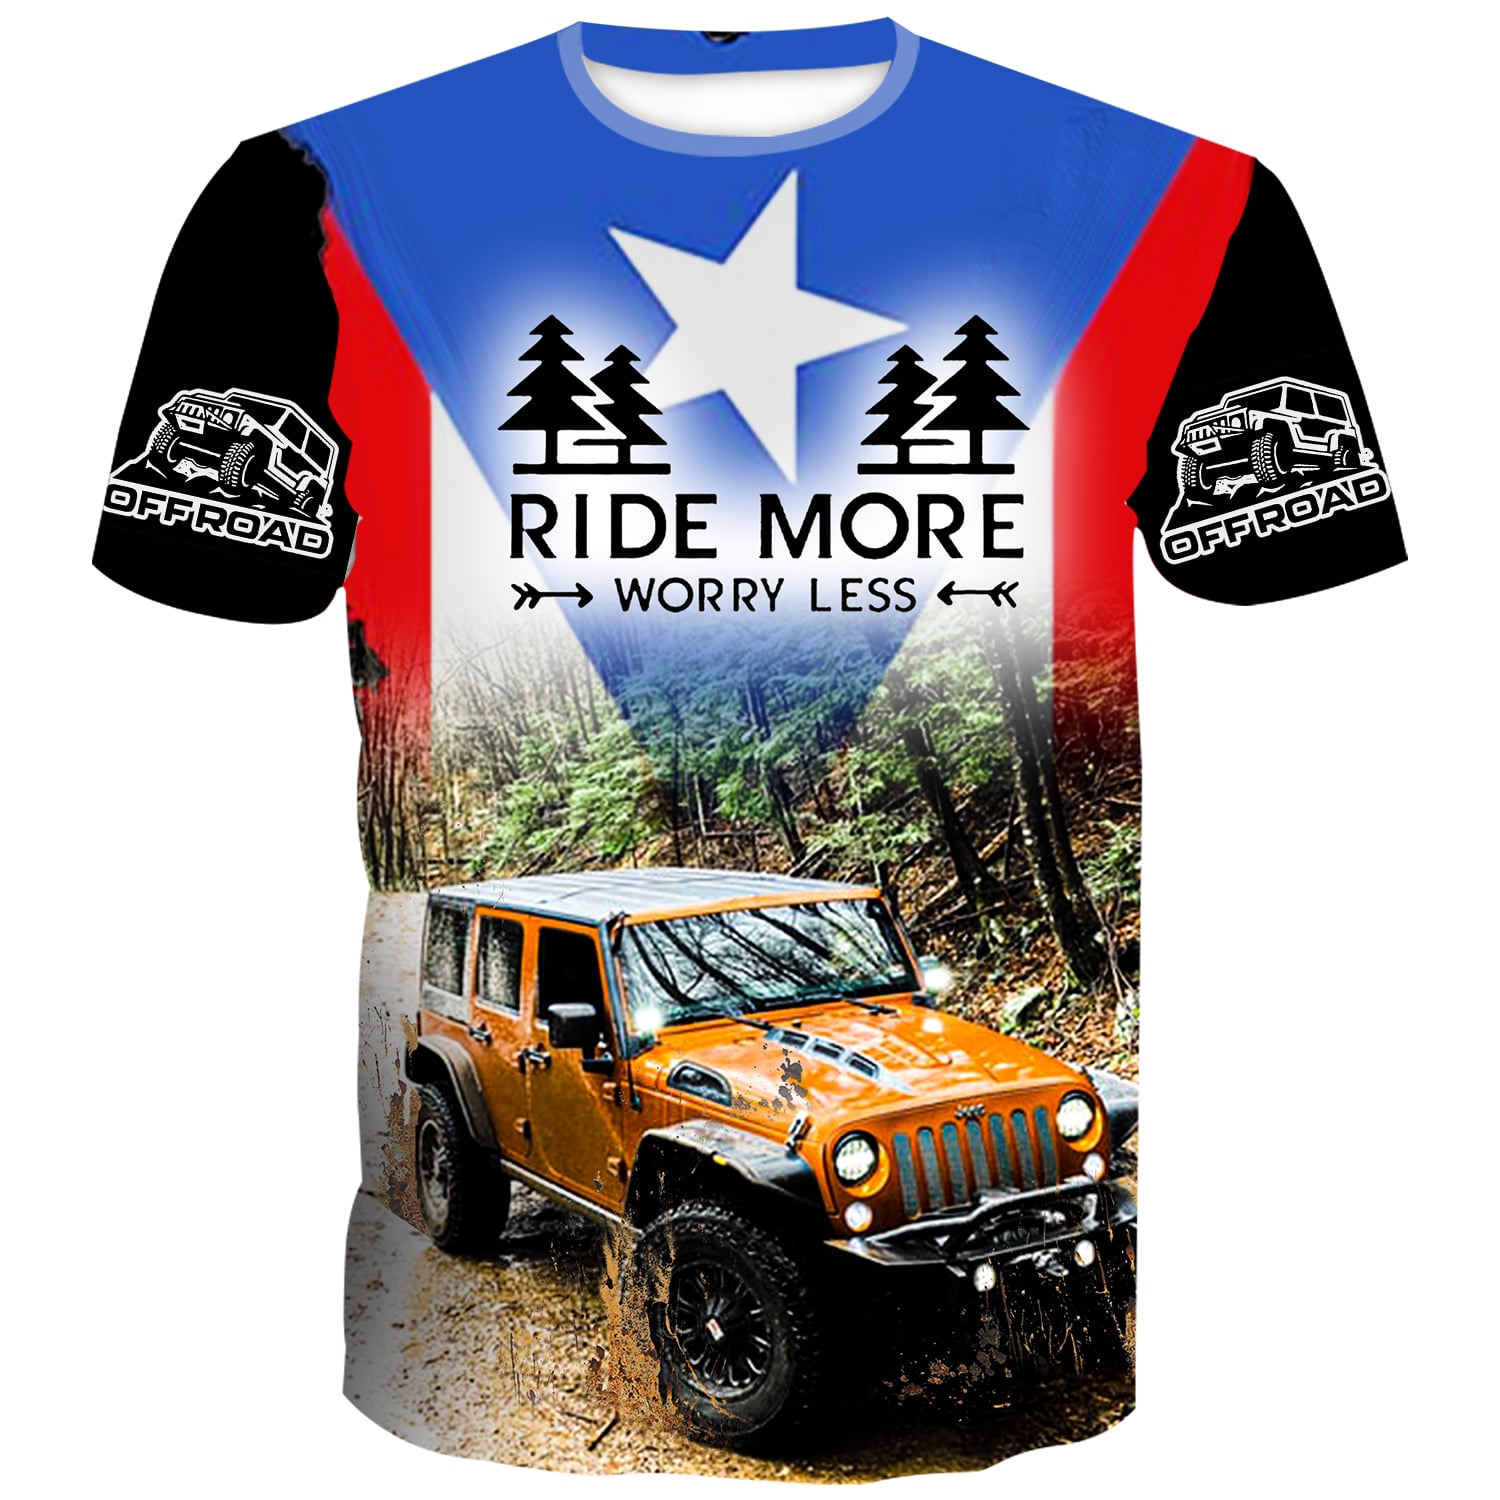 Ride more worry less - Puerto Rican Flag